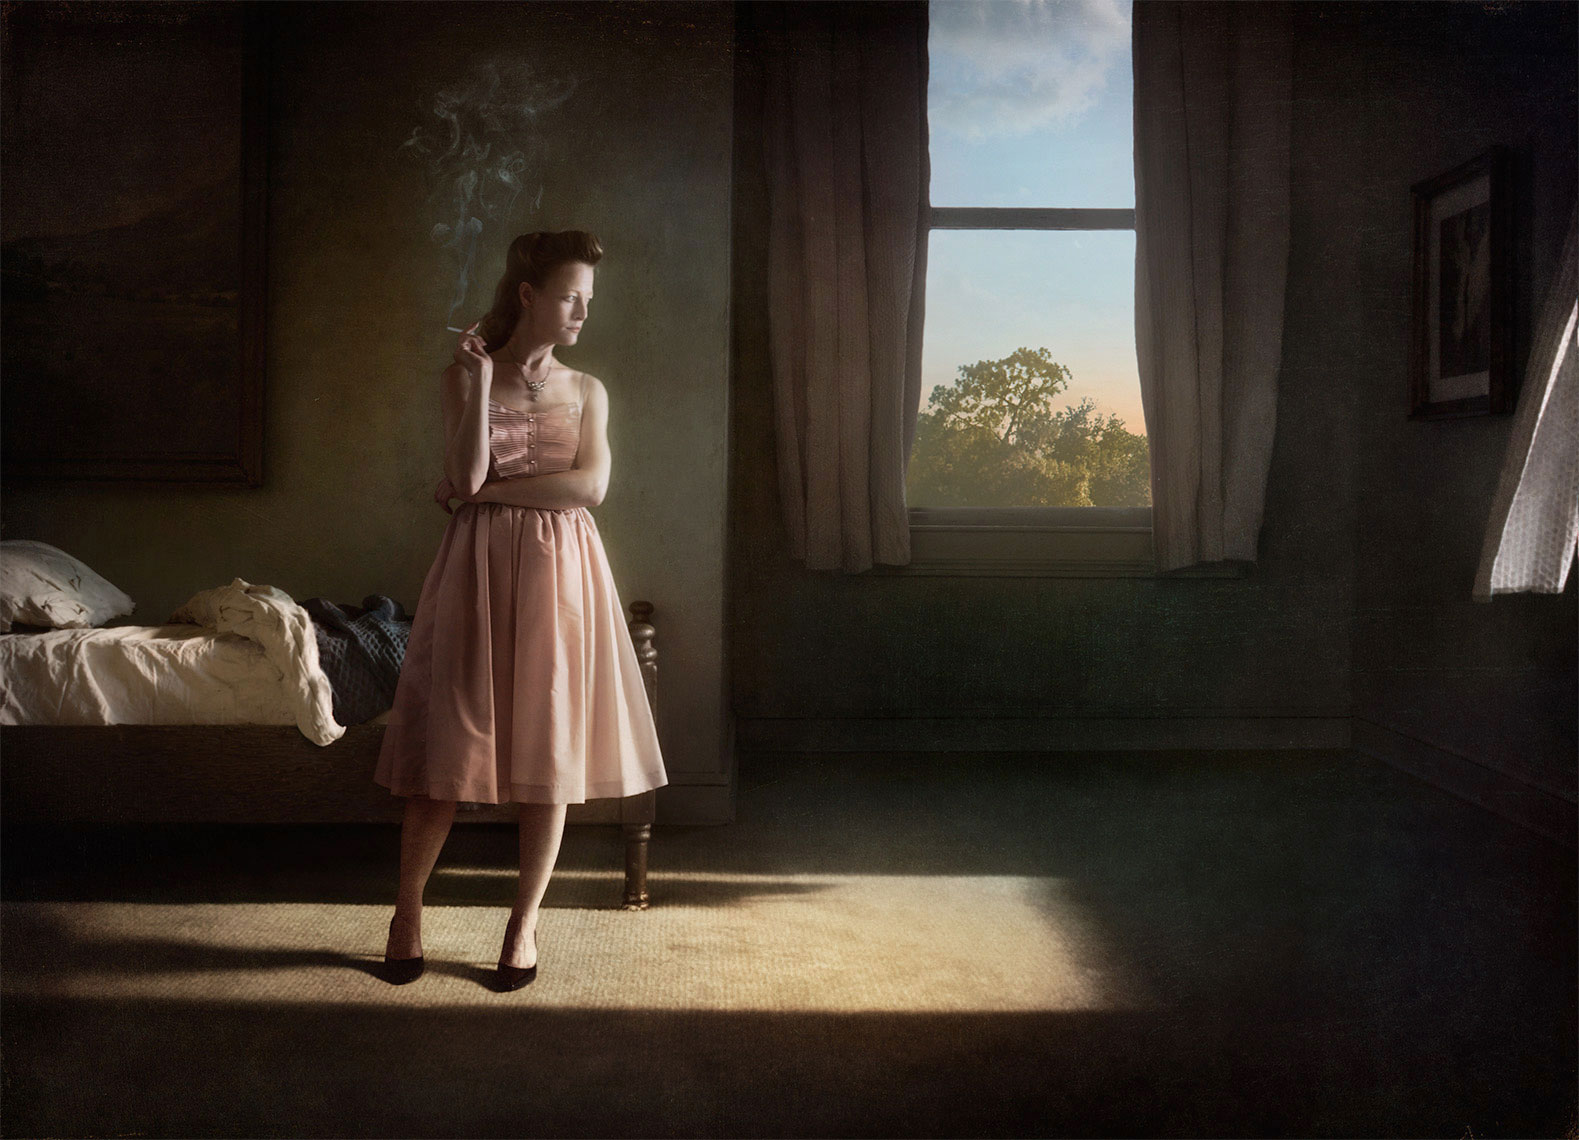 A photomontage homage to Edward Hopper, set in a 1940s’ bedroom, a dishwater-blonde woman wearing a pale pink spaghetti-strap dress, stands in a rectangle of bright sunlight, holding a lit cigarette, and gazing solemnly out the window, an unmade bed in the background.